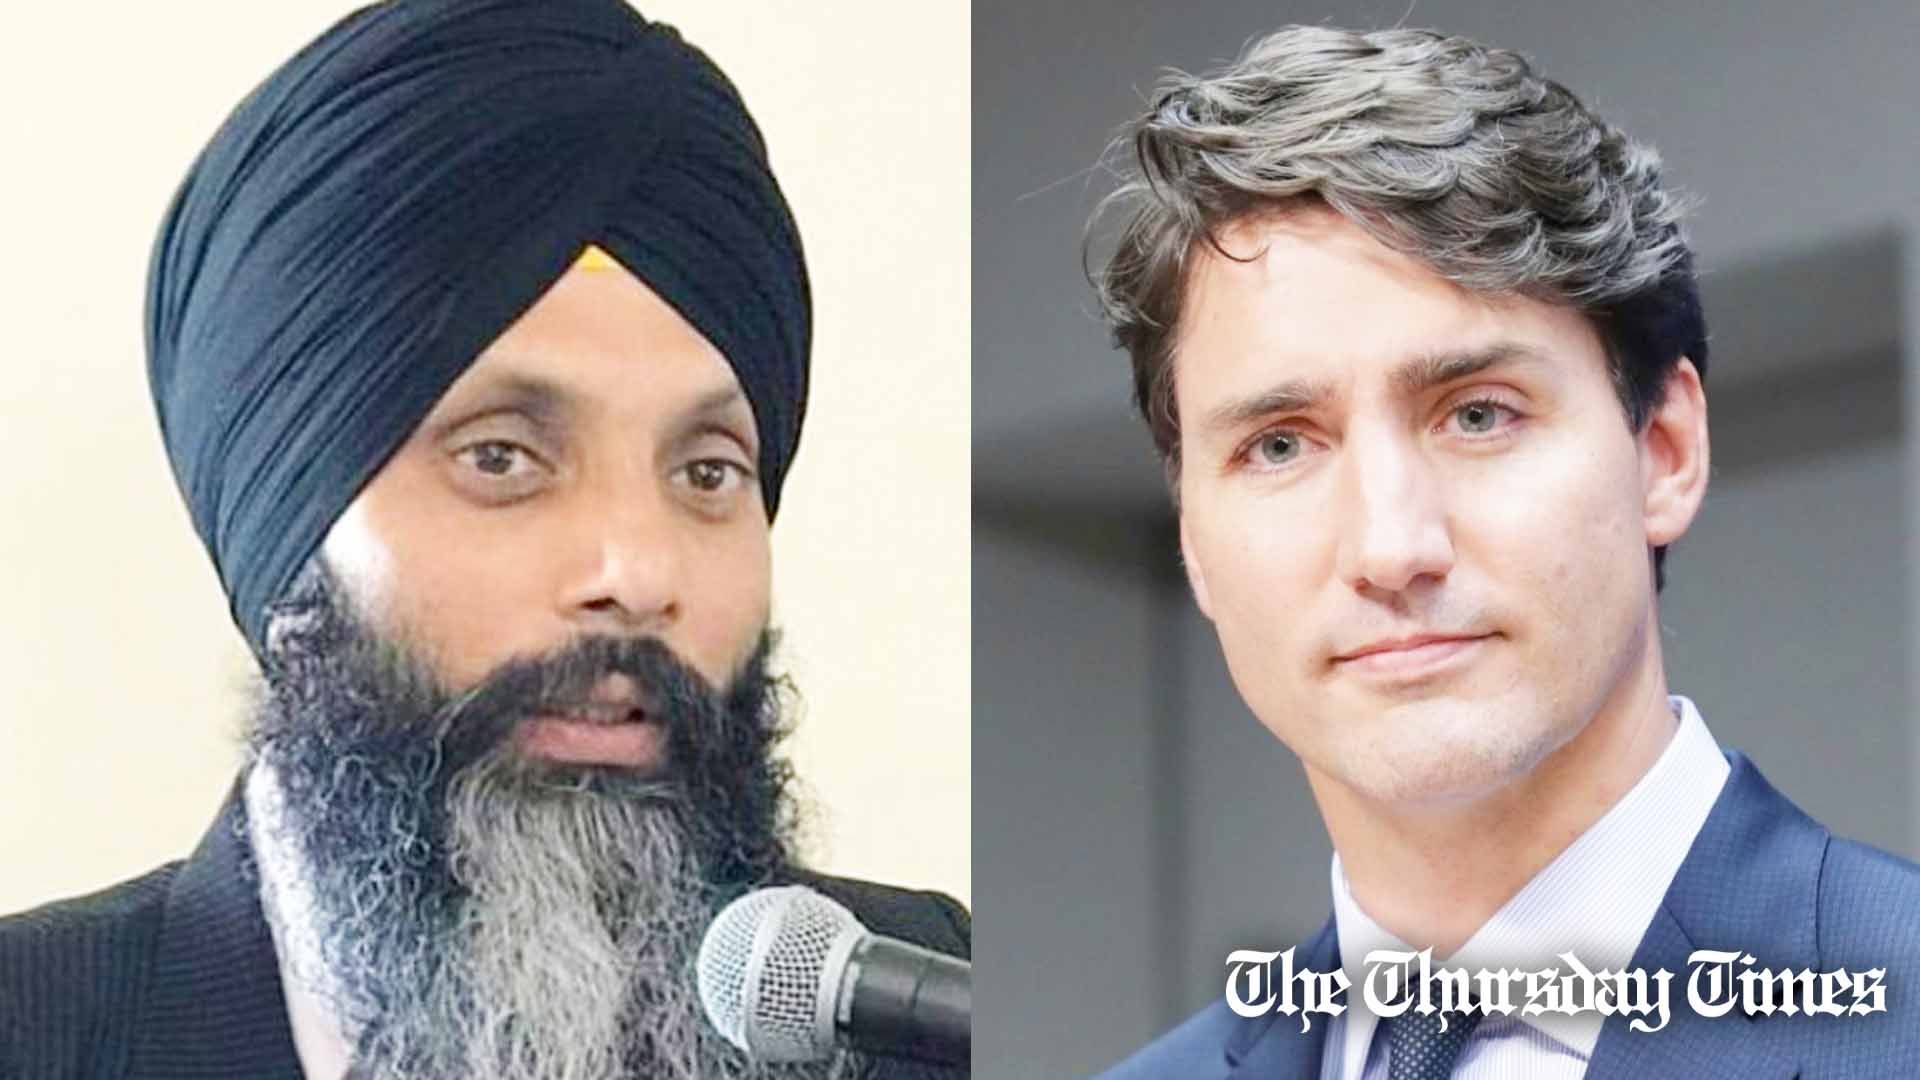 A file photo is shown of Khalistani activist Hardeep Singh Nijjar (L) and Canadian prime minister Justin Trudeau (R). — FILE/THE THURSDAY TIMES